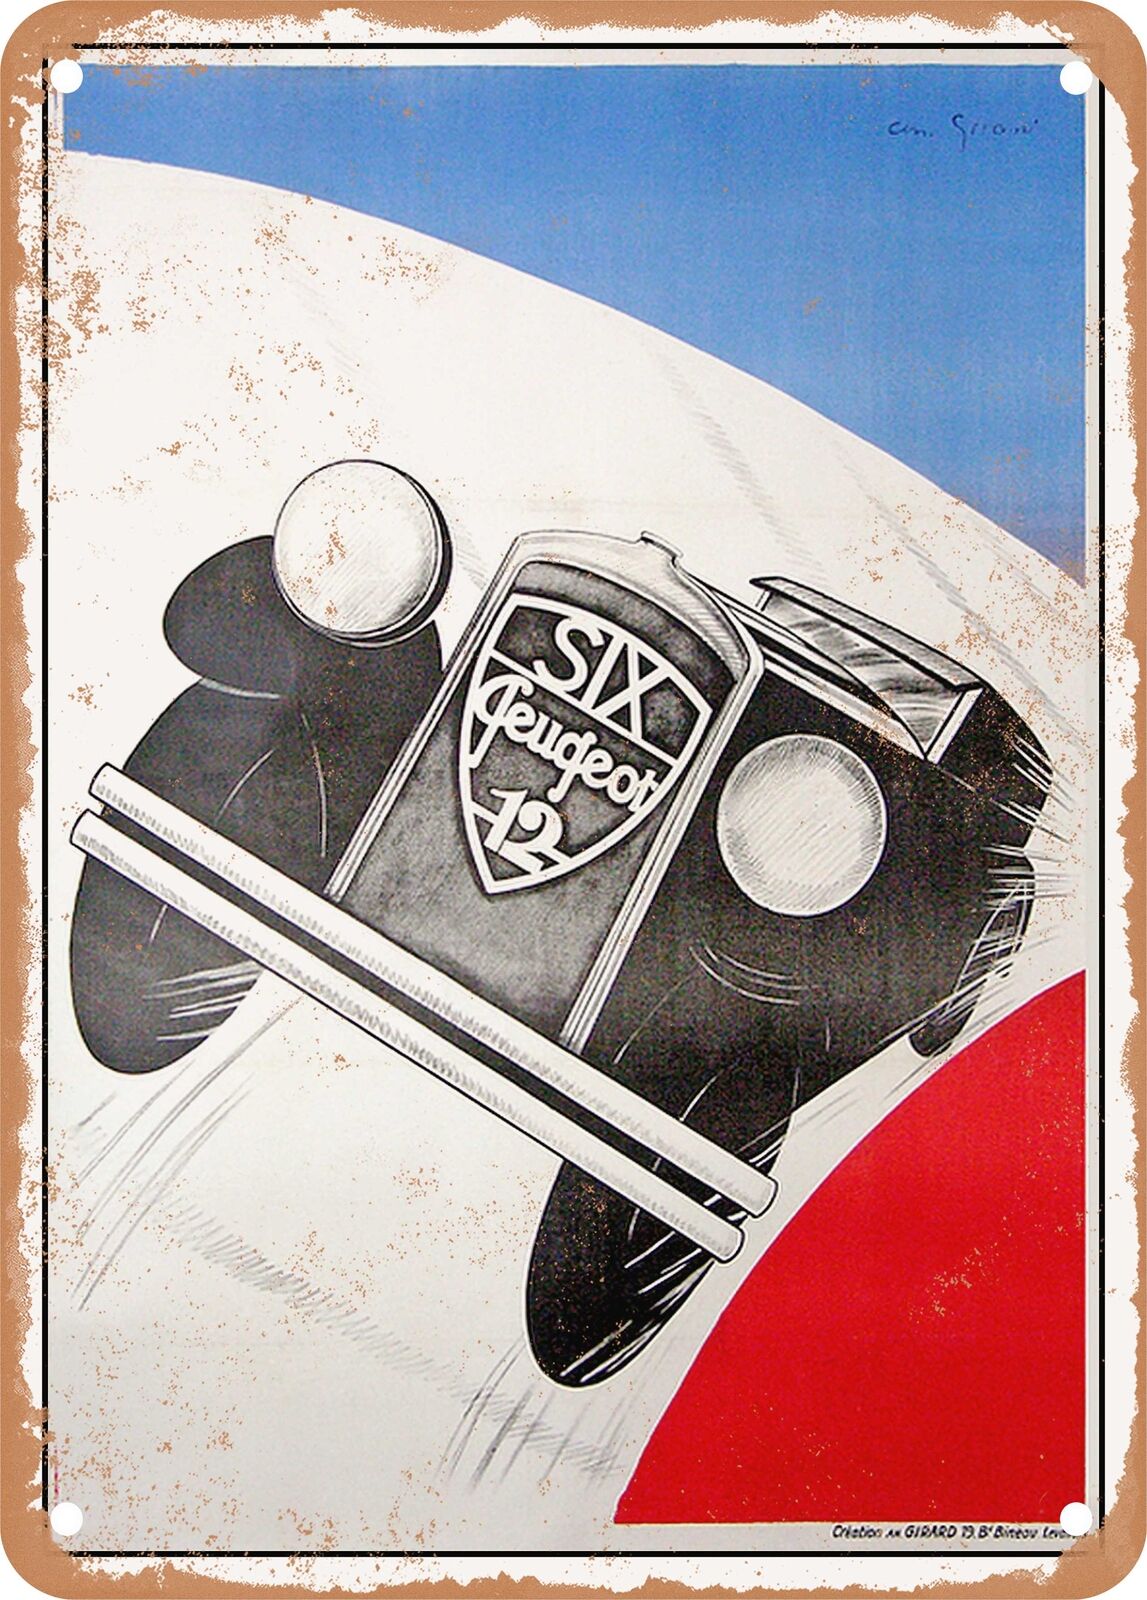 METAL SIGN - 1934 Peugeot Six 12 by Andre Girond Vintage Ad